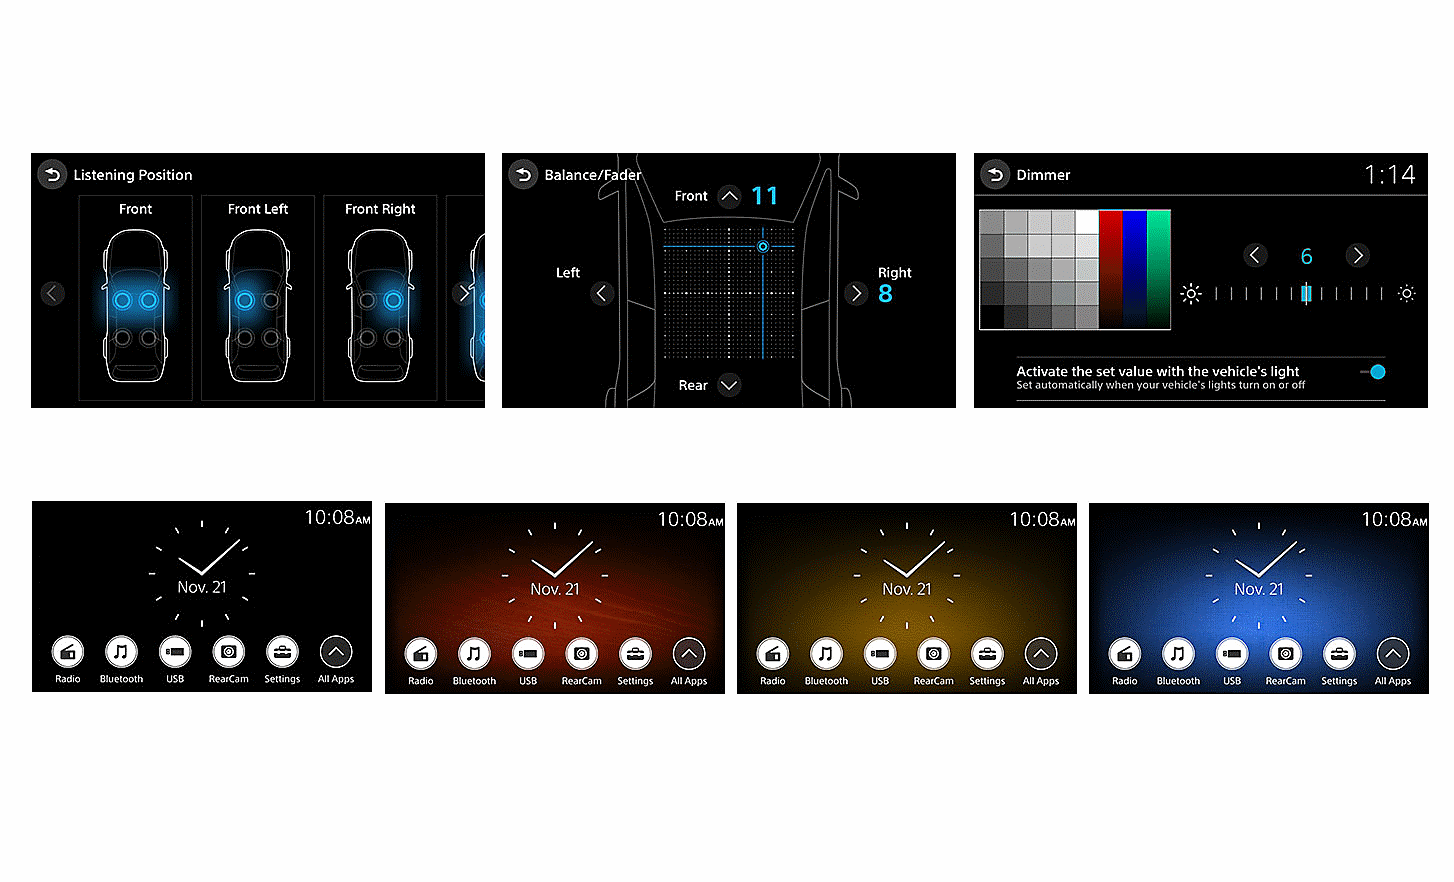 Images displaying the listening position, balance/fader and lighting dimmer interfaces above images of the clock interface